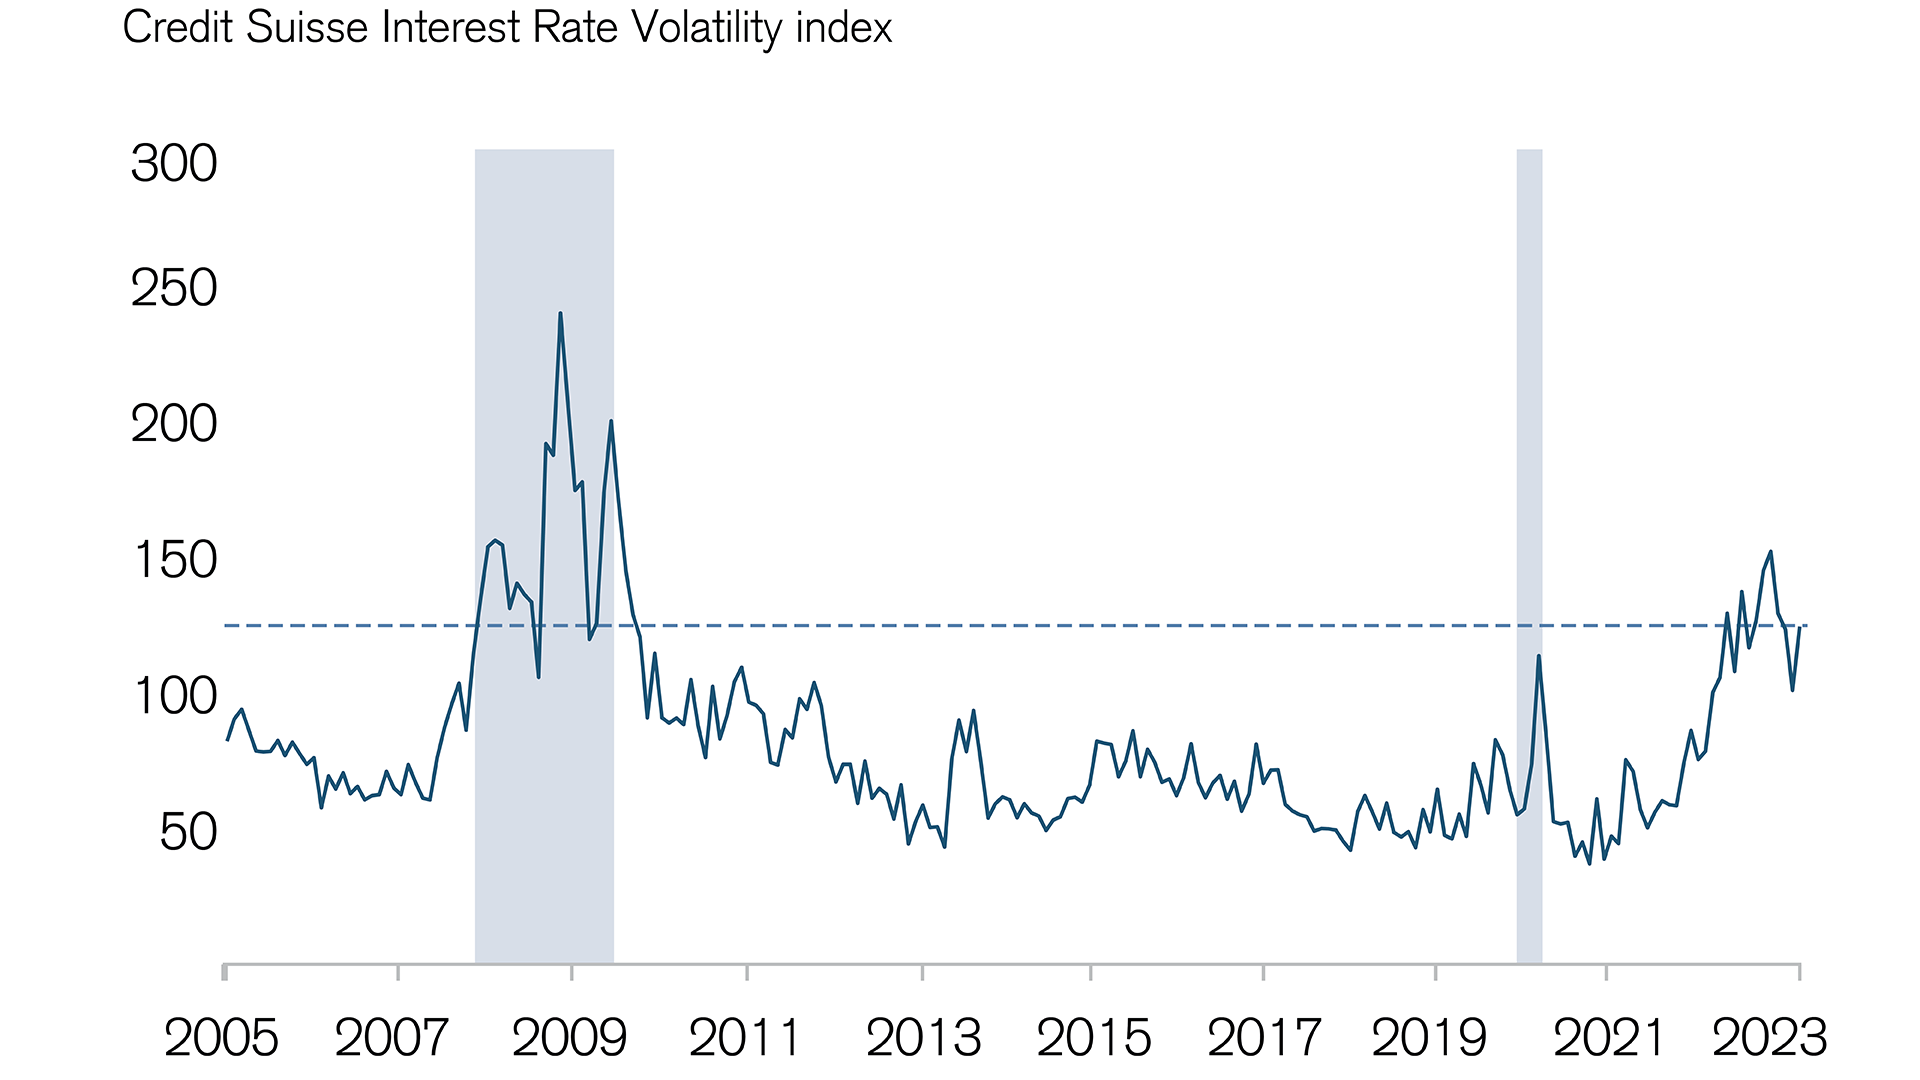 Interest rate volatility has strongly increased lately